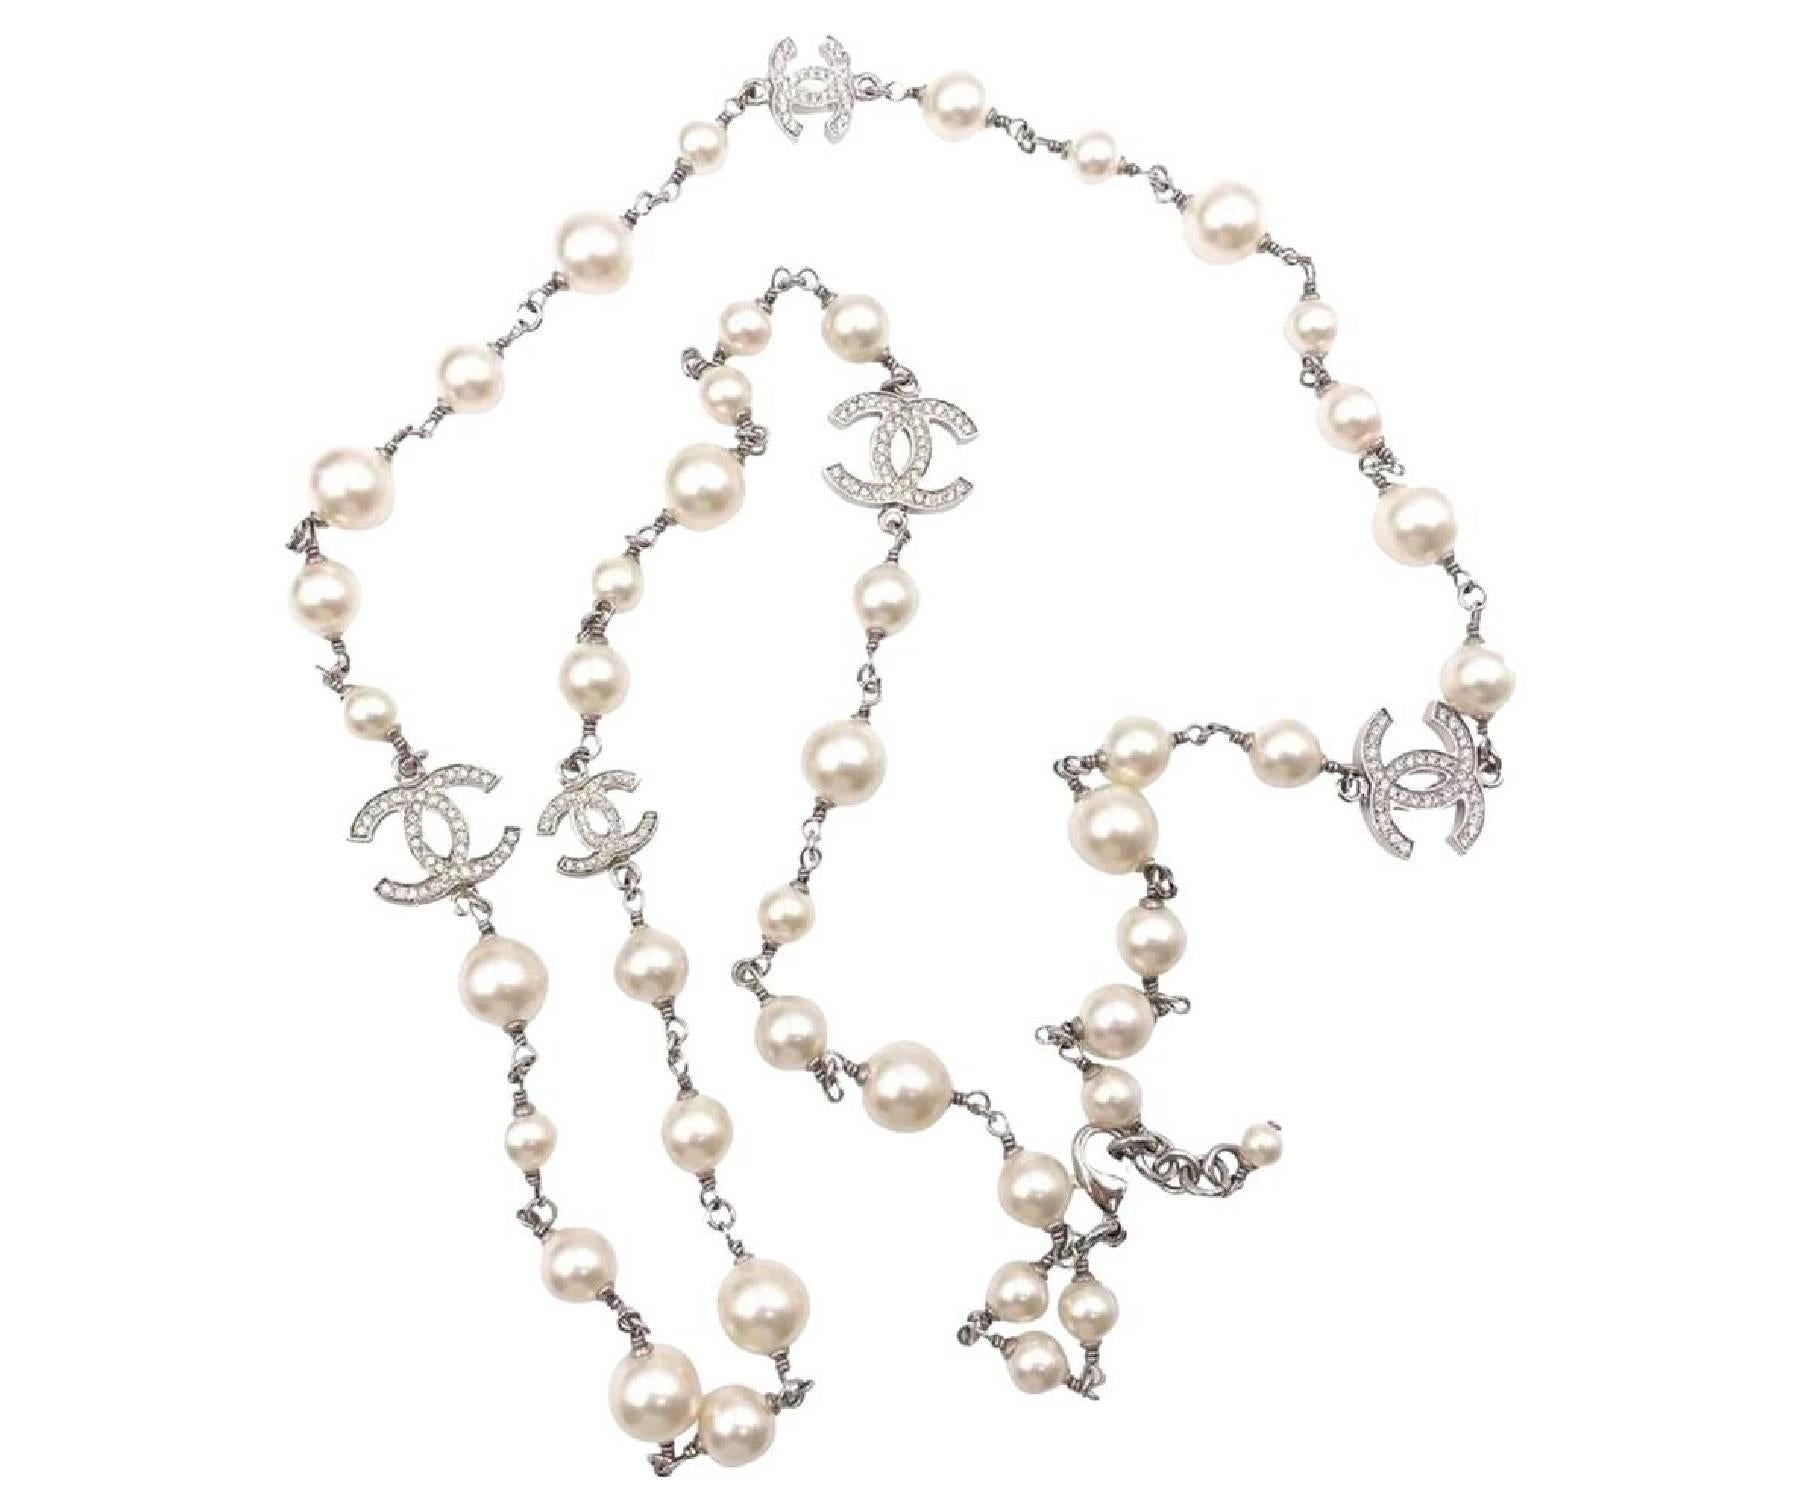 Chanel 5 Silver CC Crystal Faux Pearl Long Necklace

* Marked 15
* Made in France
* Comes with the original box and dustbag

-It is approximately 42